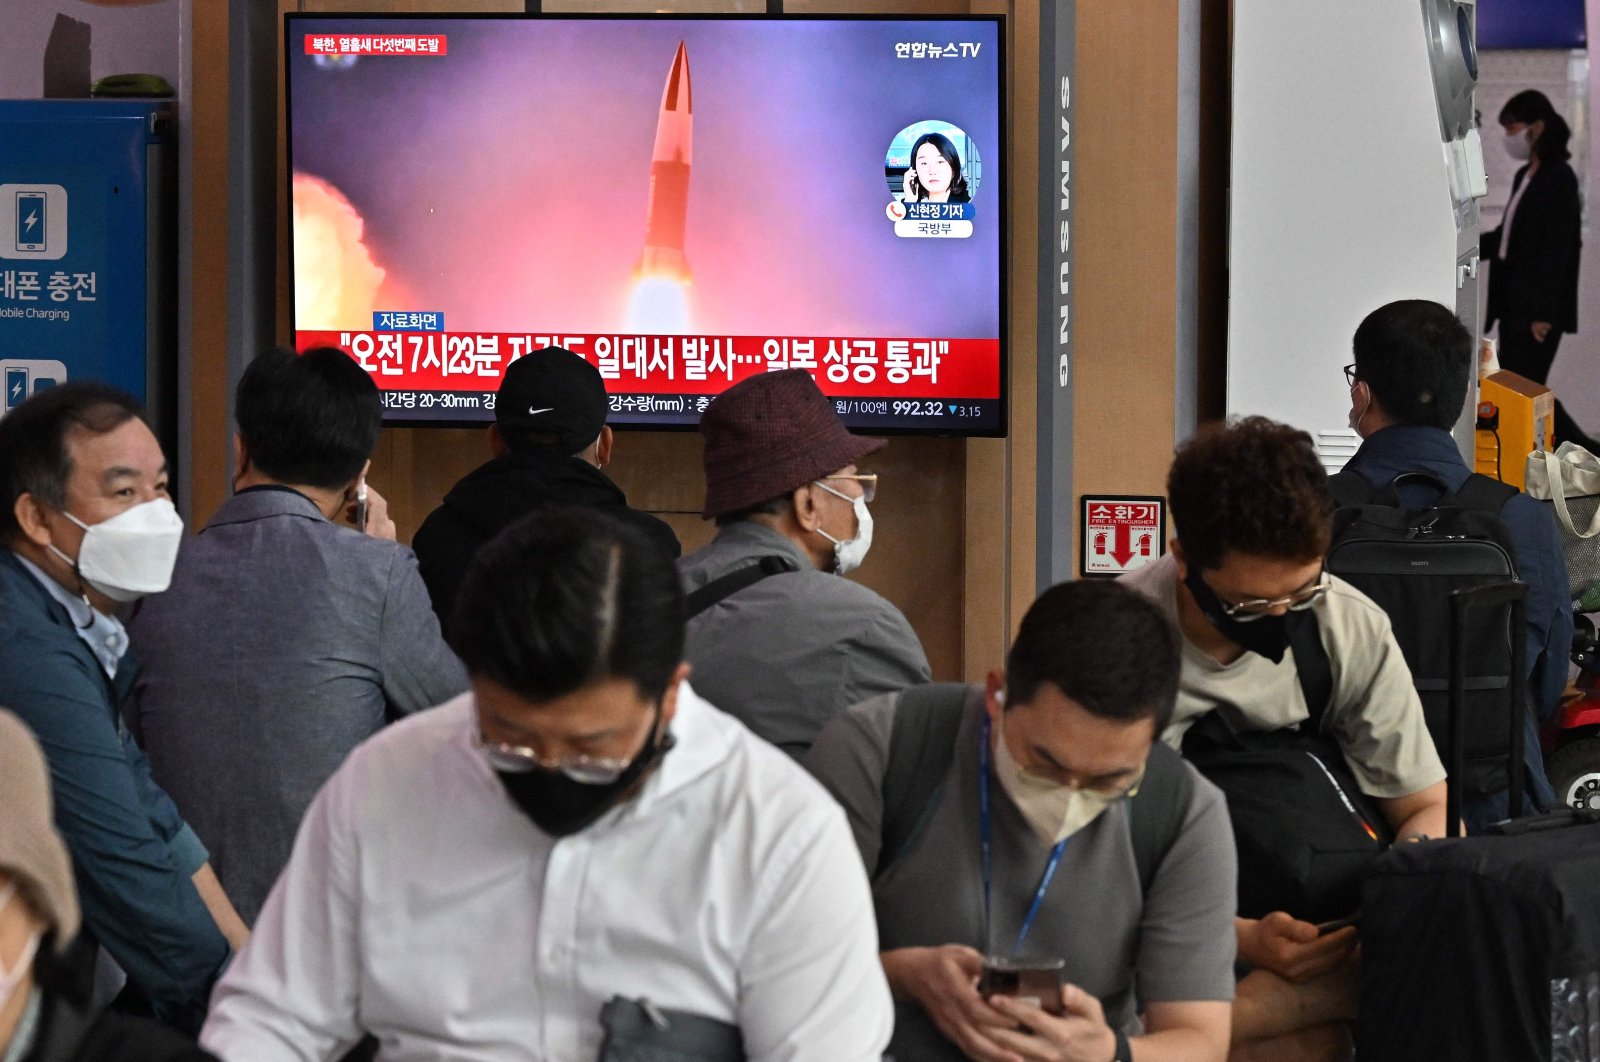 People watch a television screen showing a news broadcast of file footage of a North Korean missile test, at a railway station, Seoul, South Korea, Oct. 4, 2022. (AFP Photo)